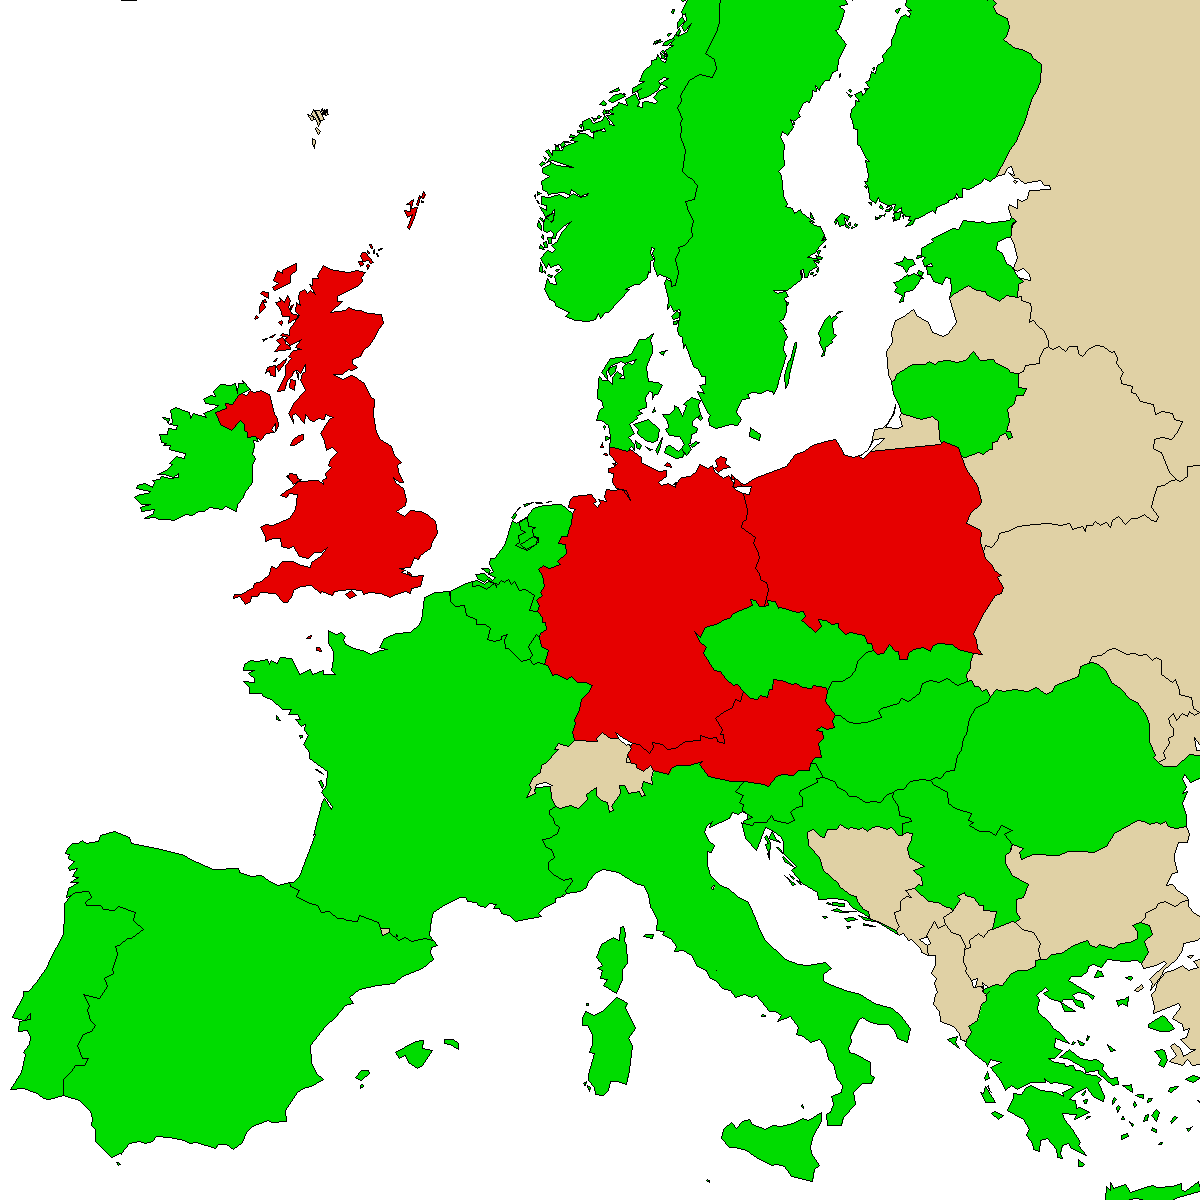 legal info map for our product Mephedrene, green are countries with no ban, red with ban, grey is unknown